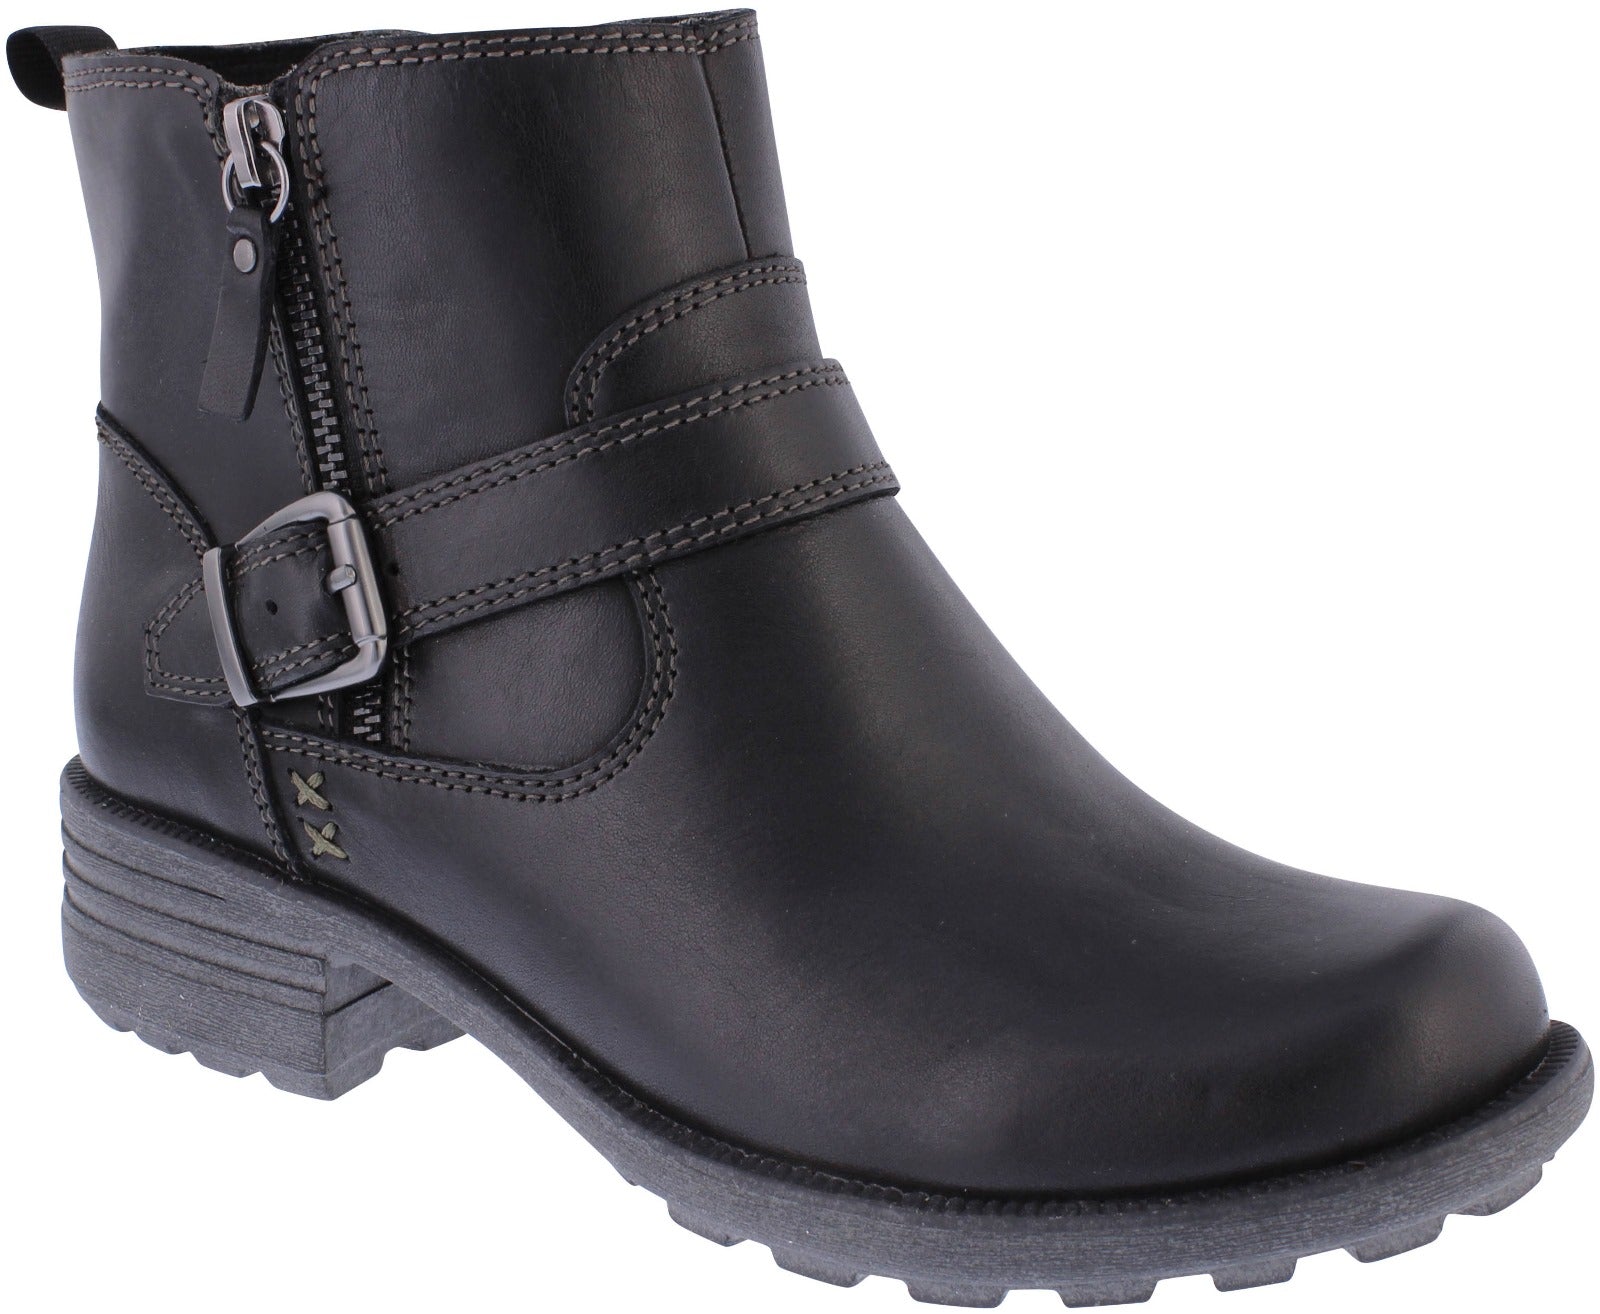 Free Spirit 40818 Greta Ladies Black Leather Arch Support Side Zip Ankle Boots